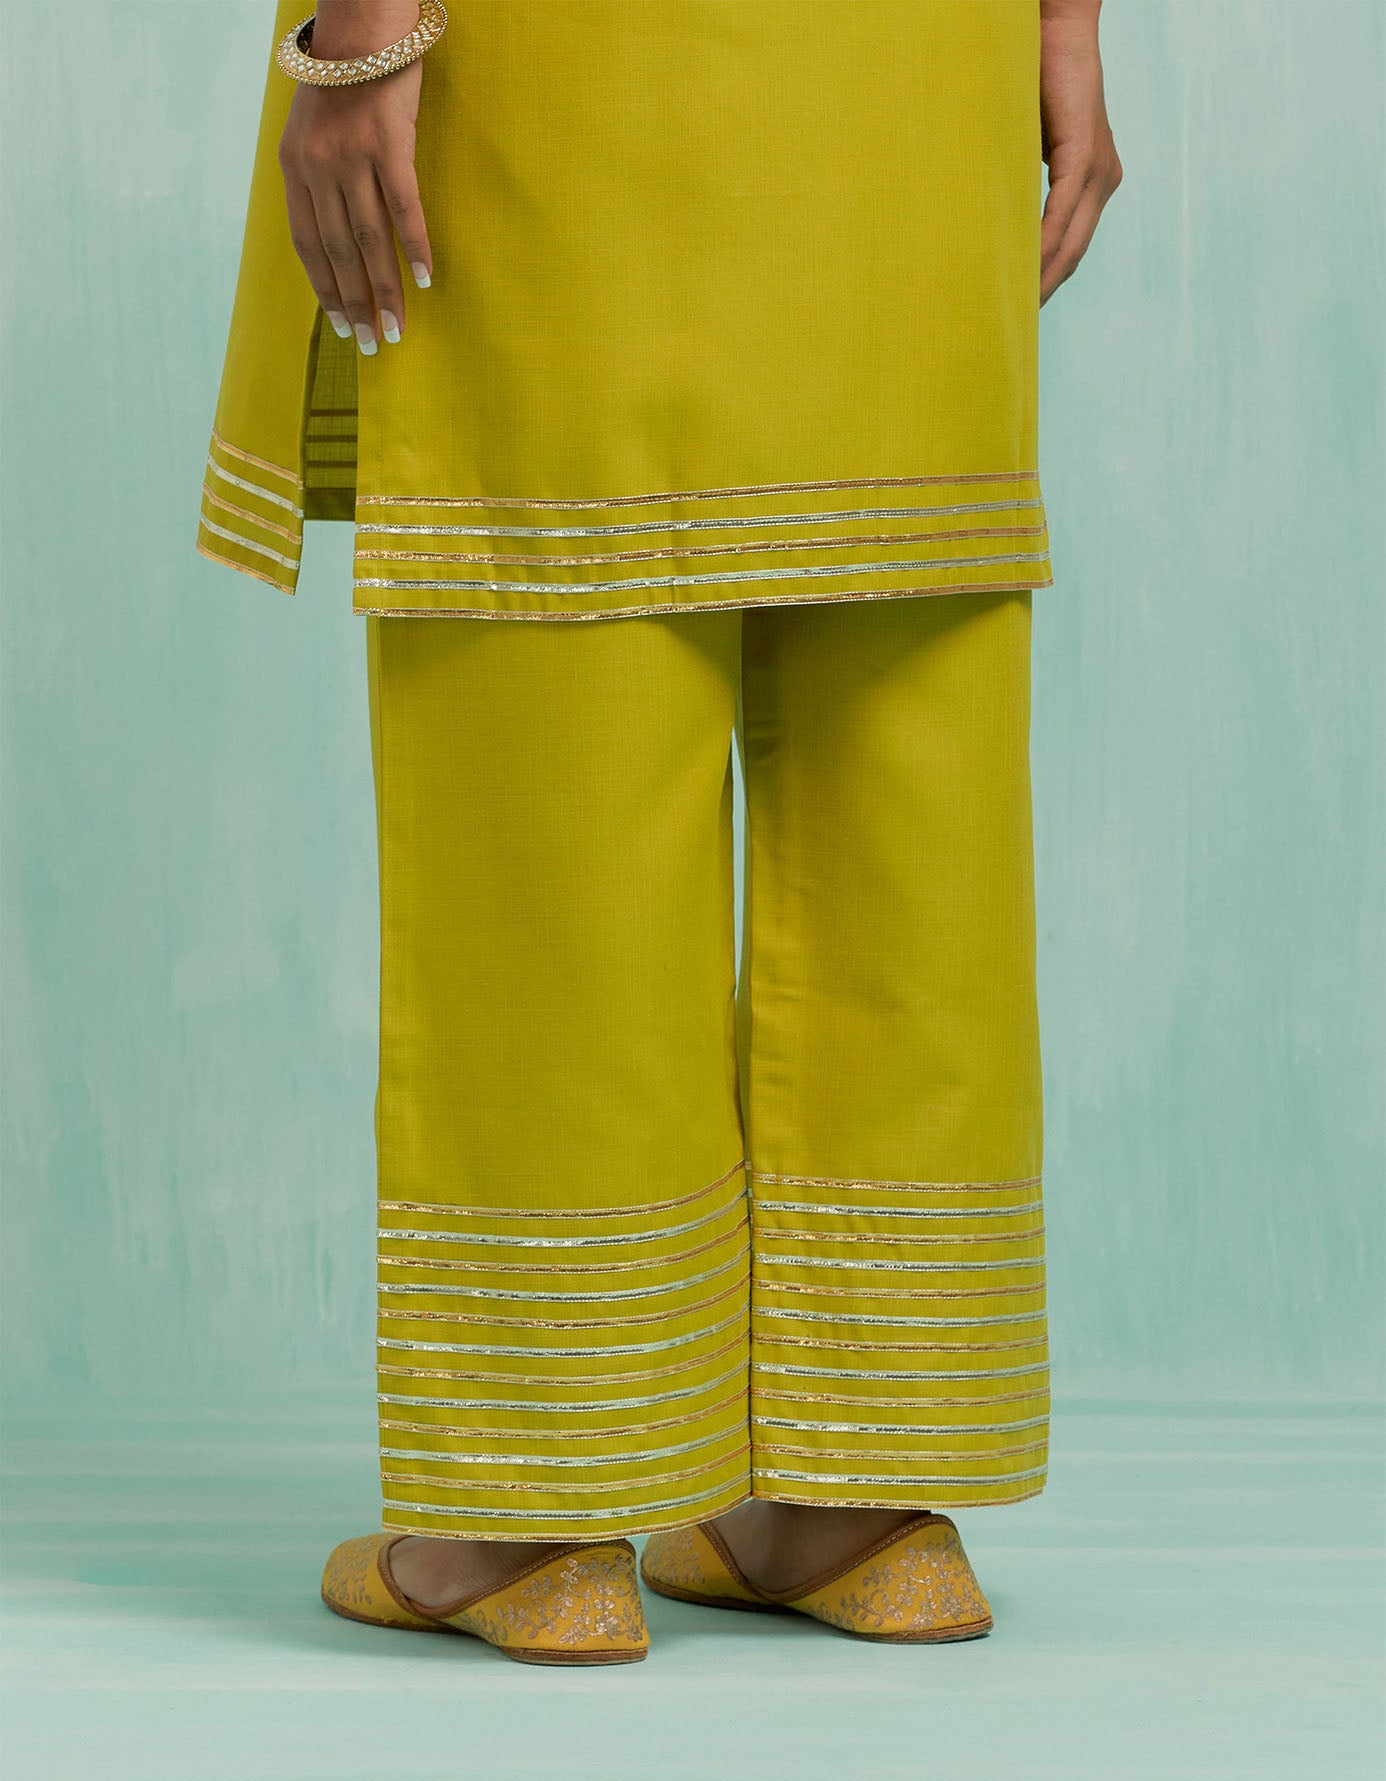 Buy Gold Chiffon Parallel Pants Online - Shop for W